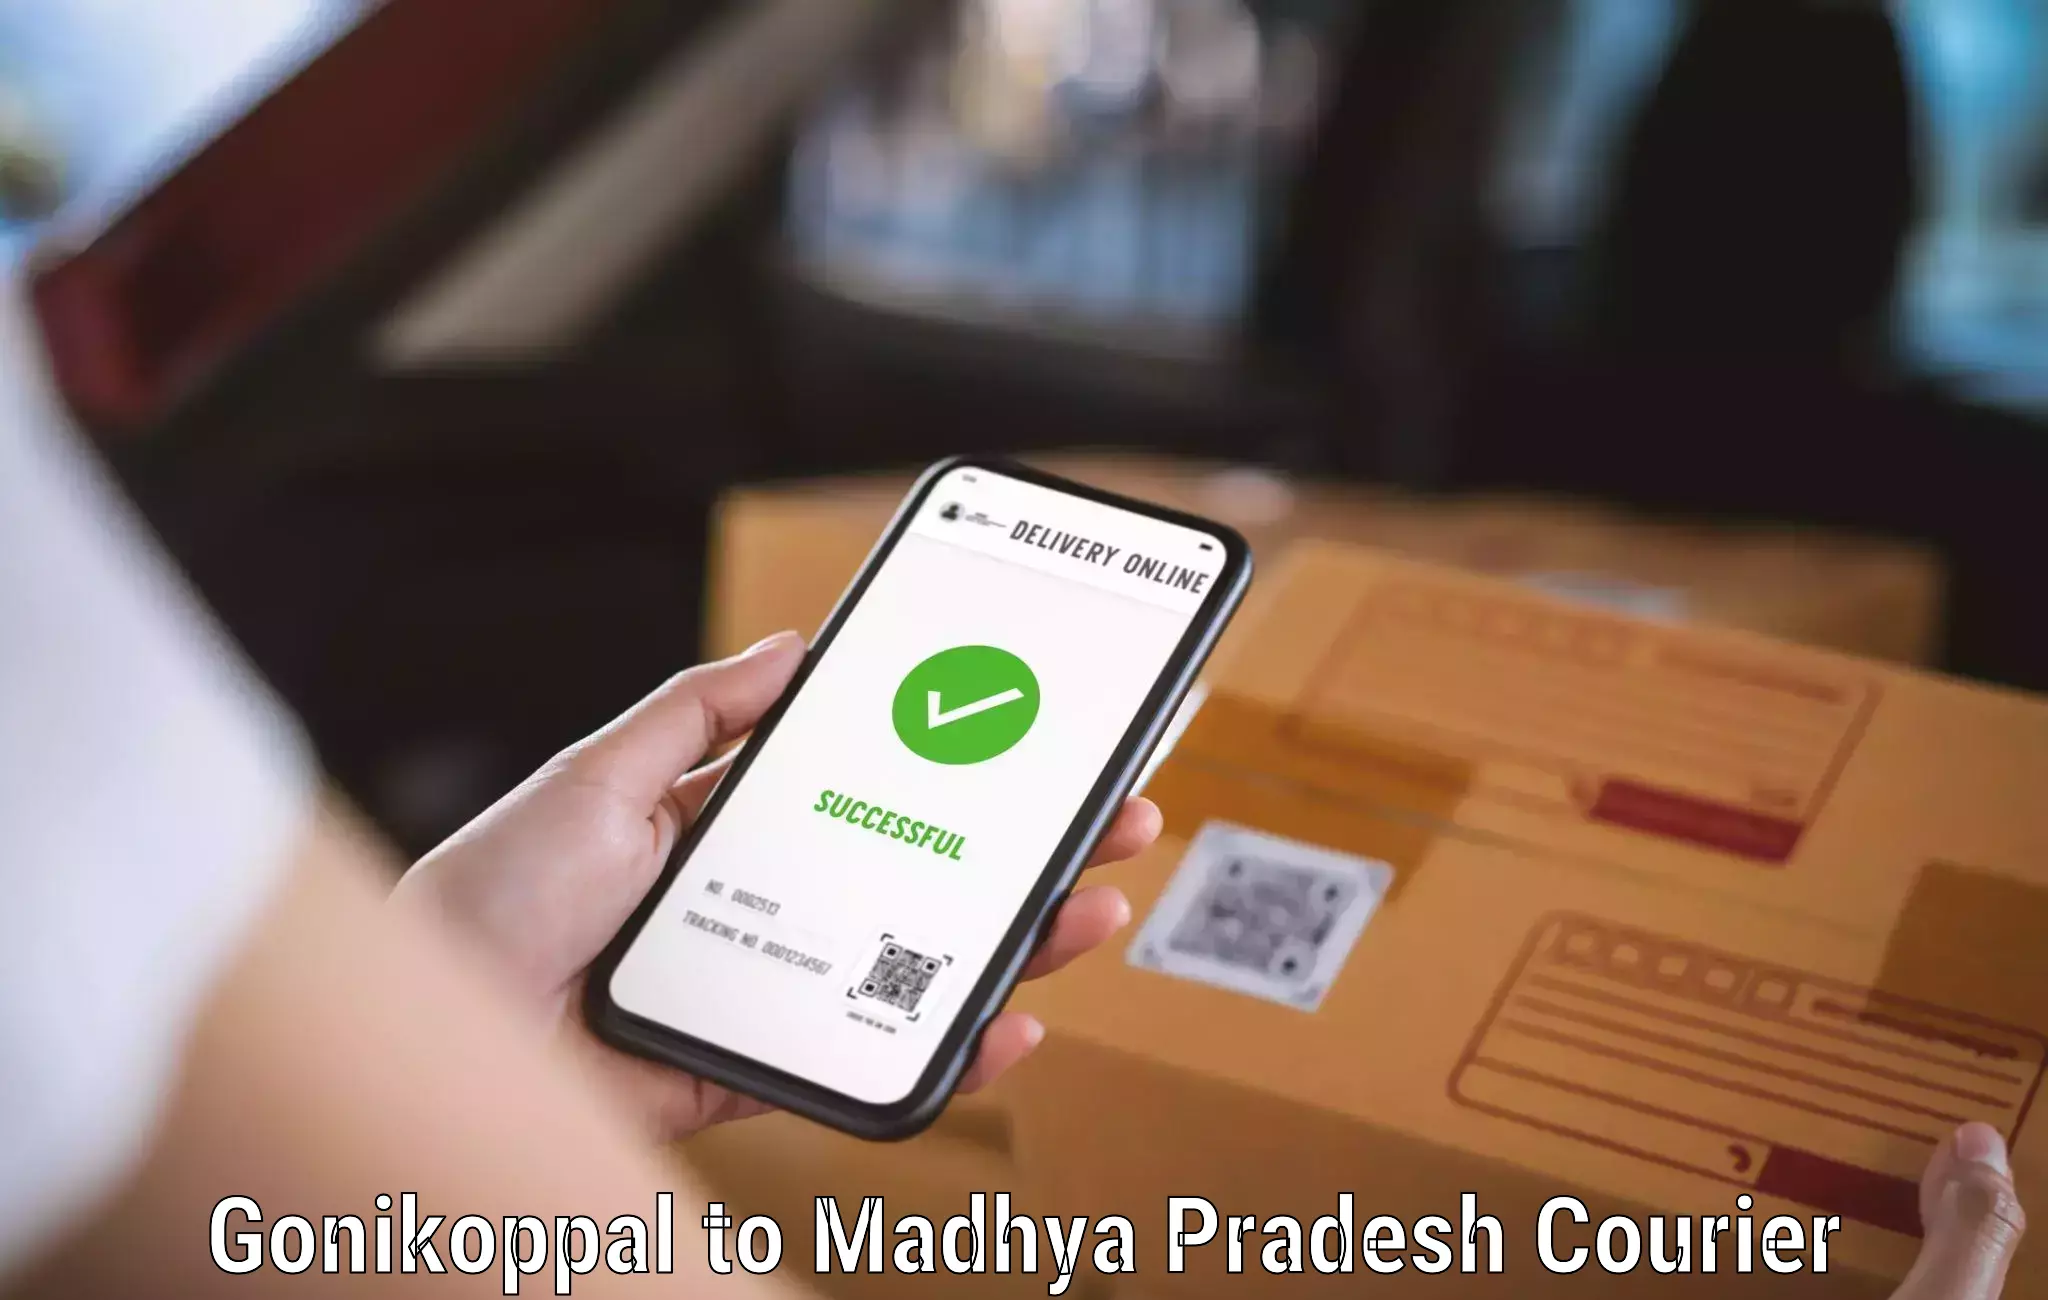 Package tracking in Gonikoppal to Dindori